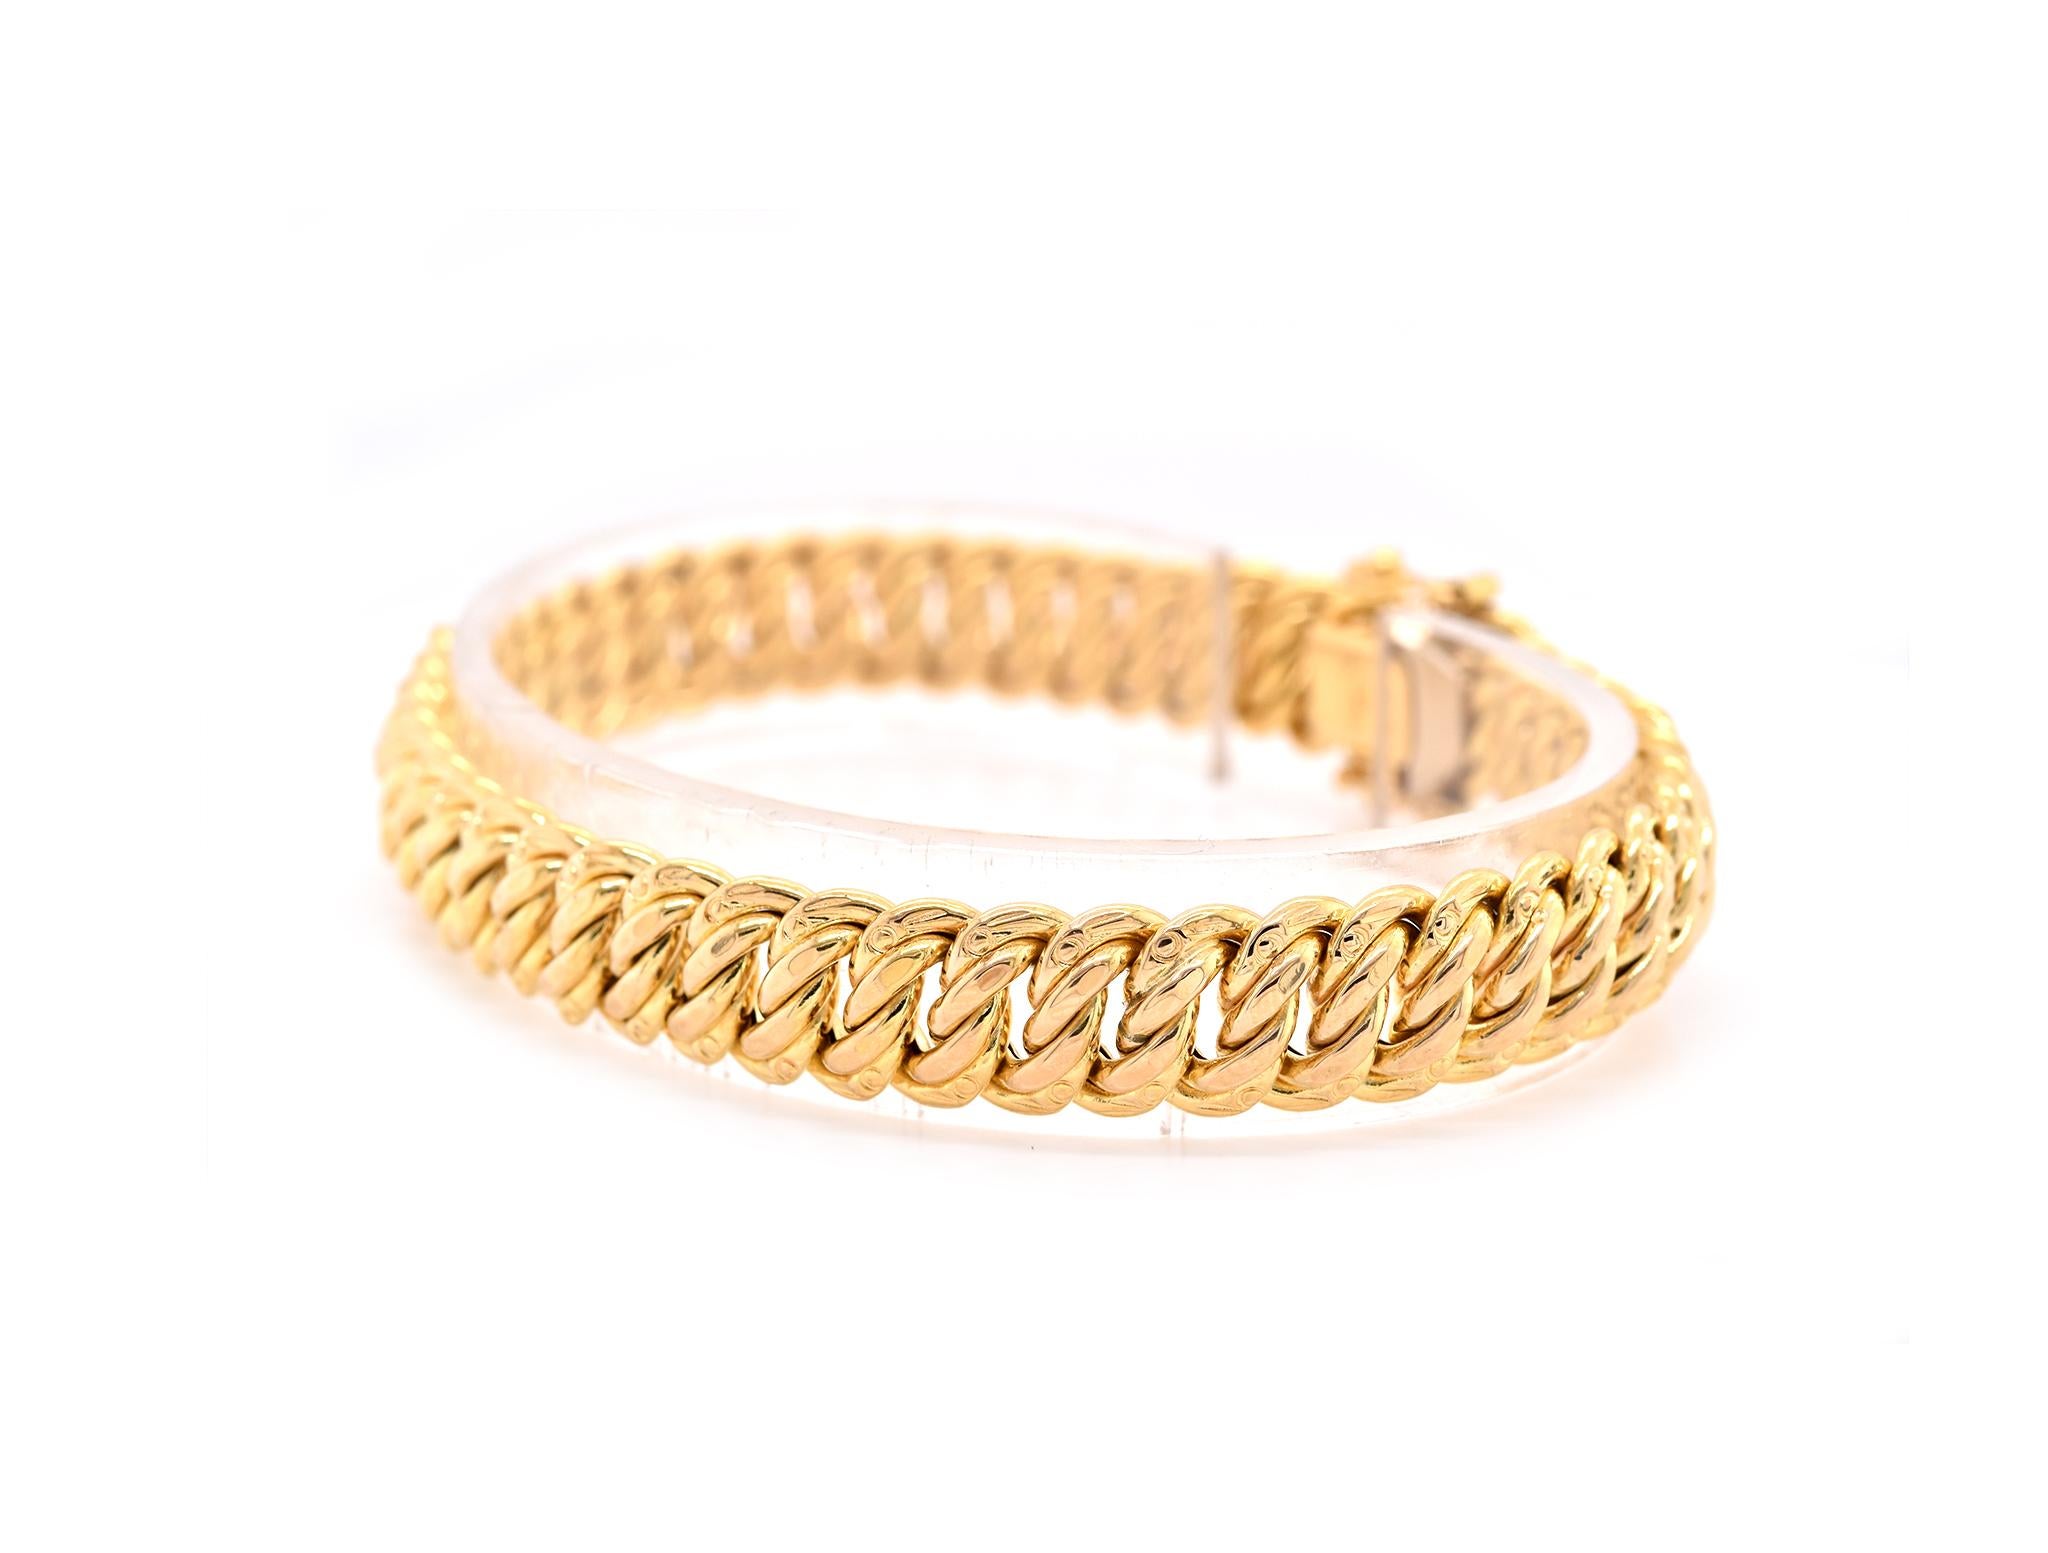 Material: 14k yellow gold
Dimensions: bracelet measures 7.5-inches in length
Weight: 18.58 grams
